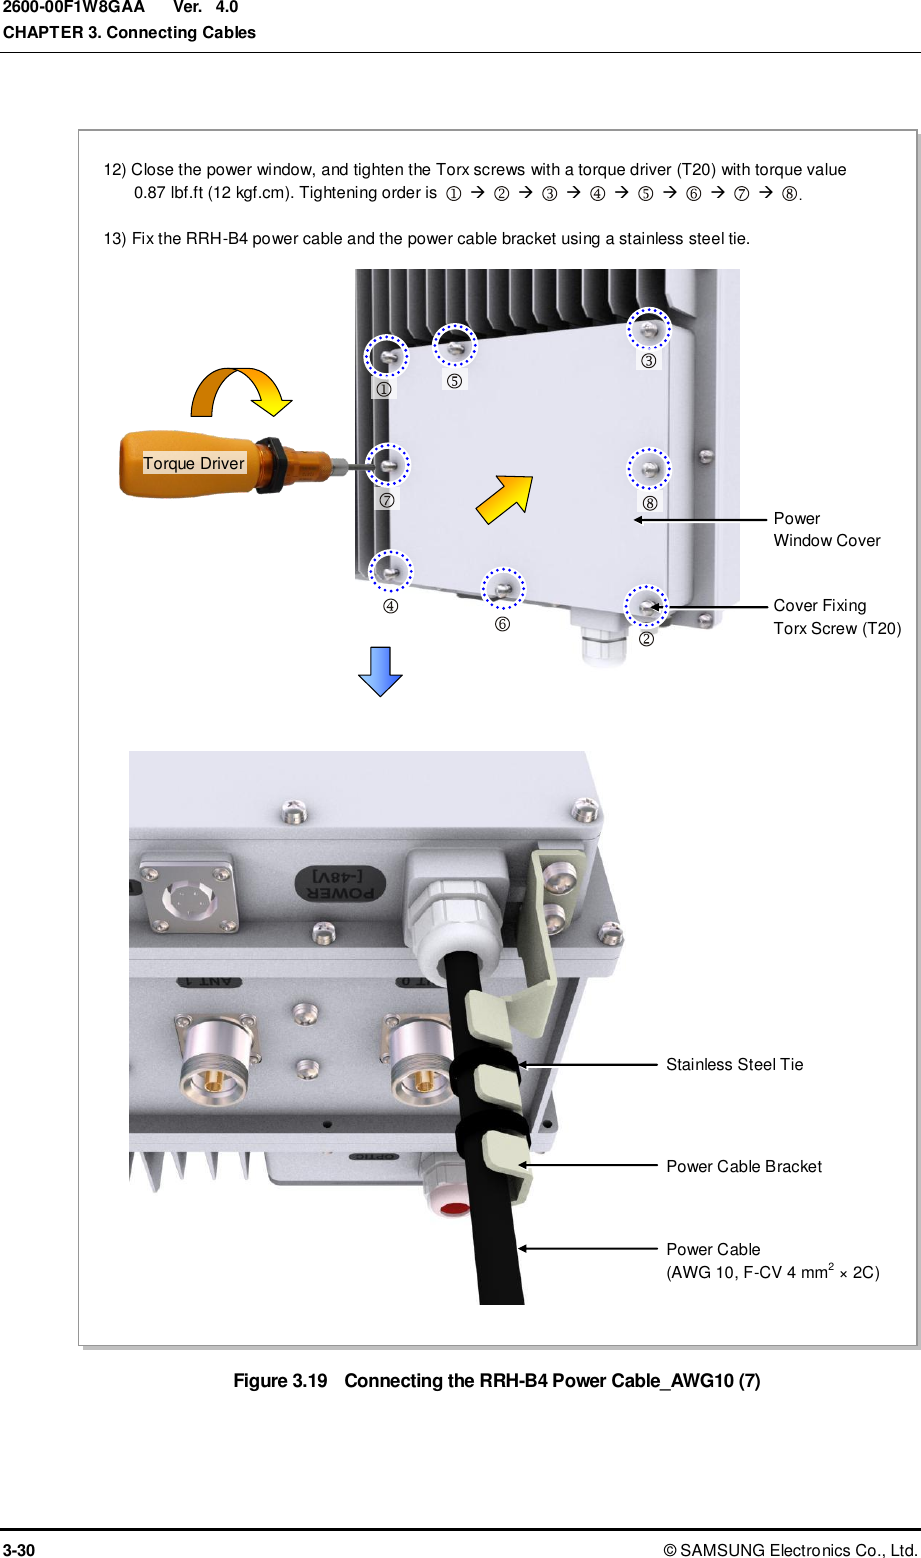  Ver.  CHAPTER 3. Connecting Cables 3-30 ©  SAMSUNG Electronics Co., Ltd. 2600-00F1W8GAA 4.0  Figure 3.19  Connecting the RRH-B4 Power Cable_AWG10 (7) 12) Close the power window, and tighten the Torx screws with a torque driver (T20) with torque value 0.87 lbf.ft (12 kgf.cm). Tightening order is                             .  13) Fix the RRH-B4 power cable and the power cable bracket using a stainless steel tie. Stainless Steel Tie Power Cable (AWG 10, F-CV 4 mm2 × 2C) Power Cable Bracket  Cover Fixing Torx Screw (T20) Power   Window Cover         Torque Driver 